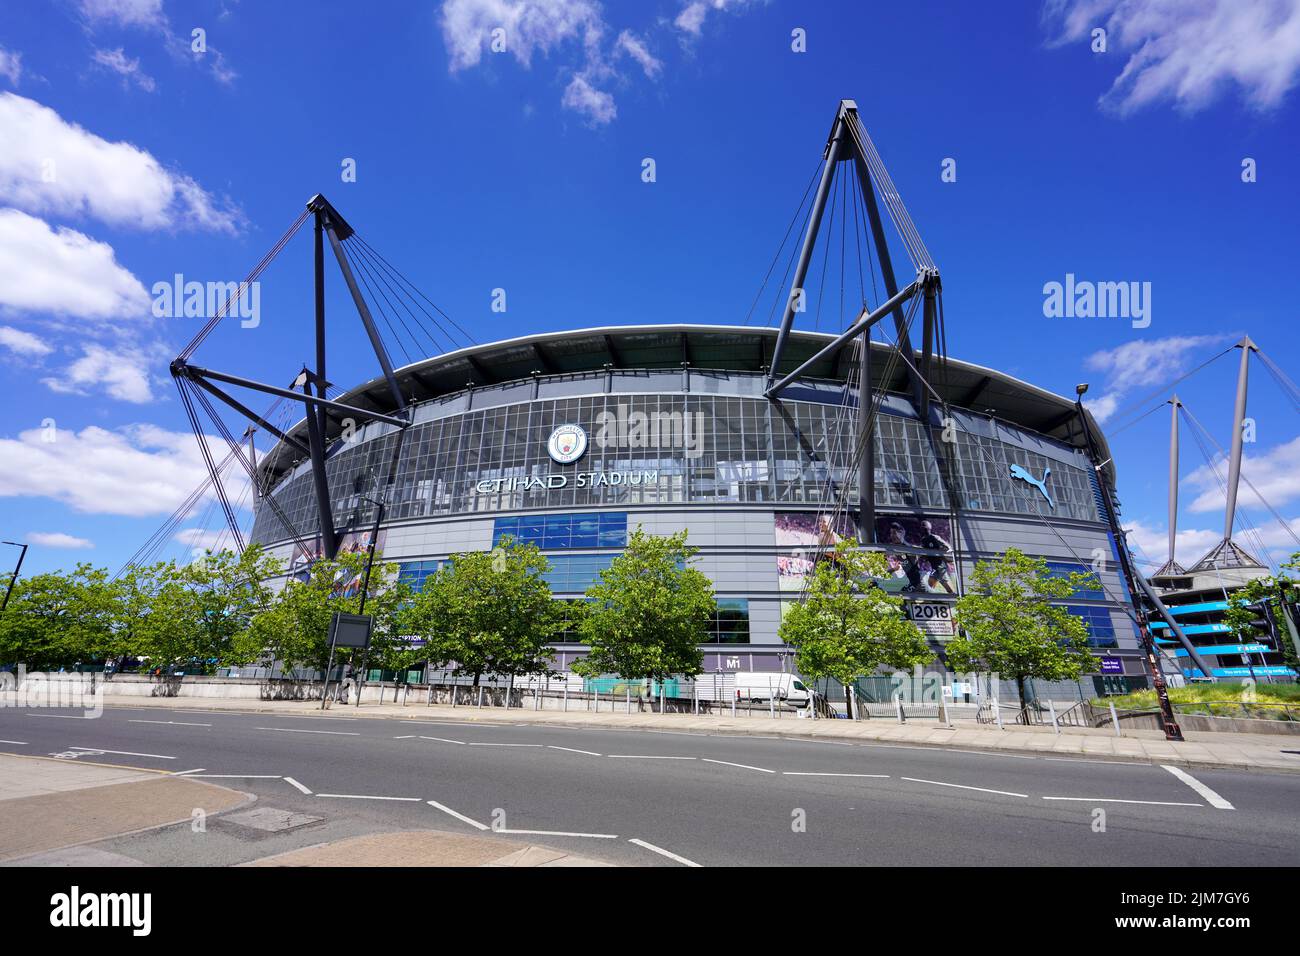 MANCHESTER, UNITED KINGDOM - JULY 13, 2022: City of Manchester Stadium also known Etihad Stadium is the home ground of Manchester City FC. Stock Photo